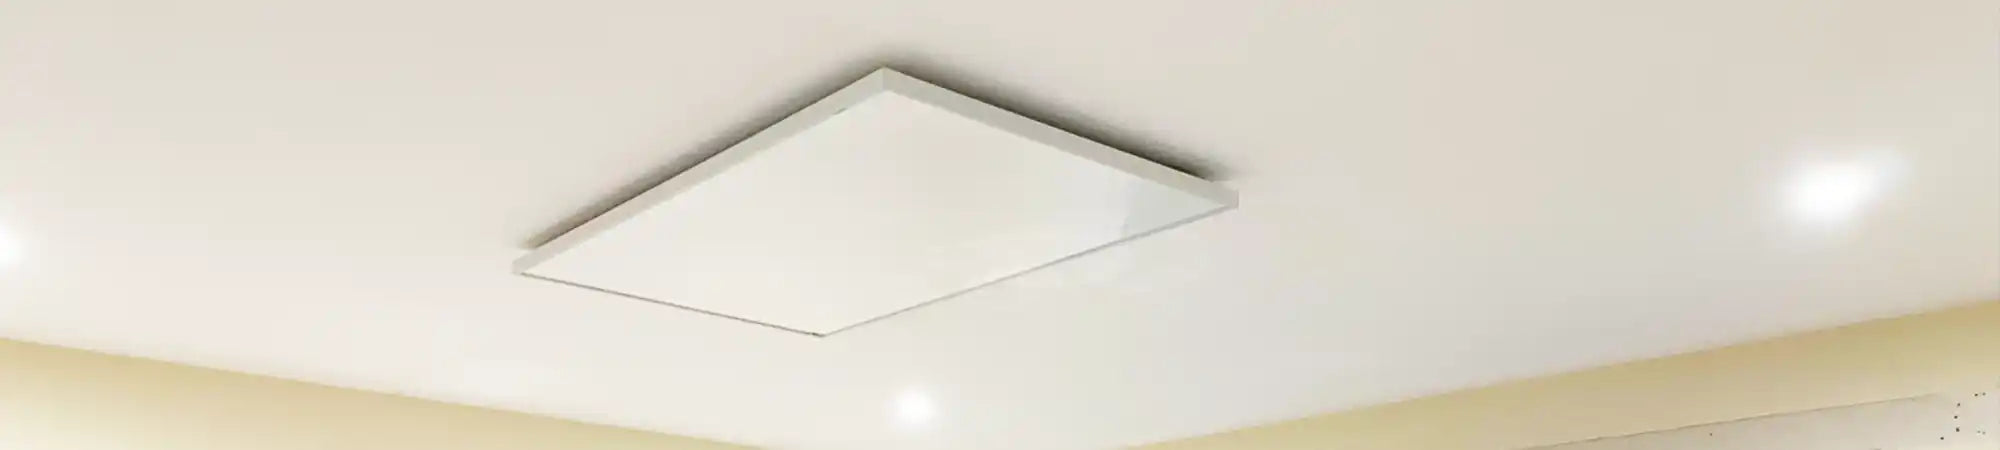 Ceiling-Mounted Infrared Heater Panels